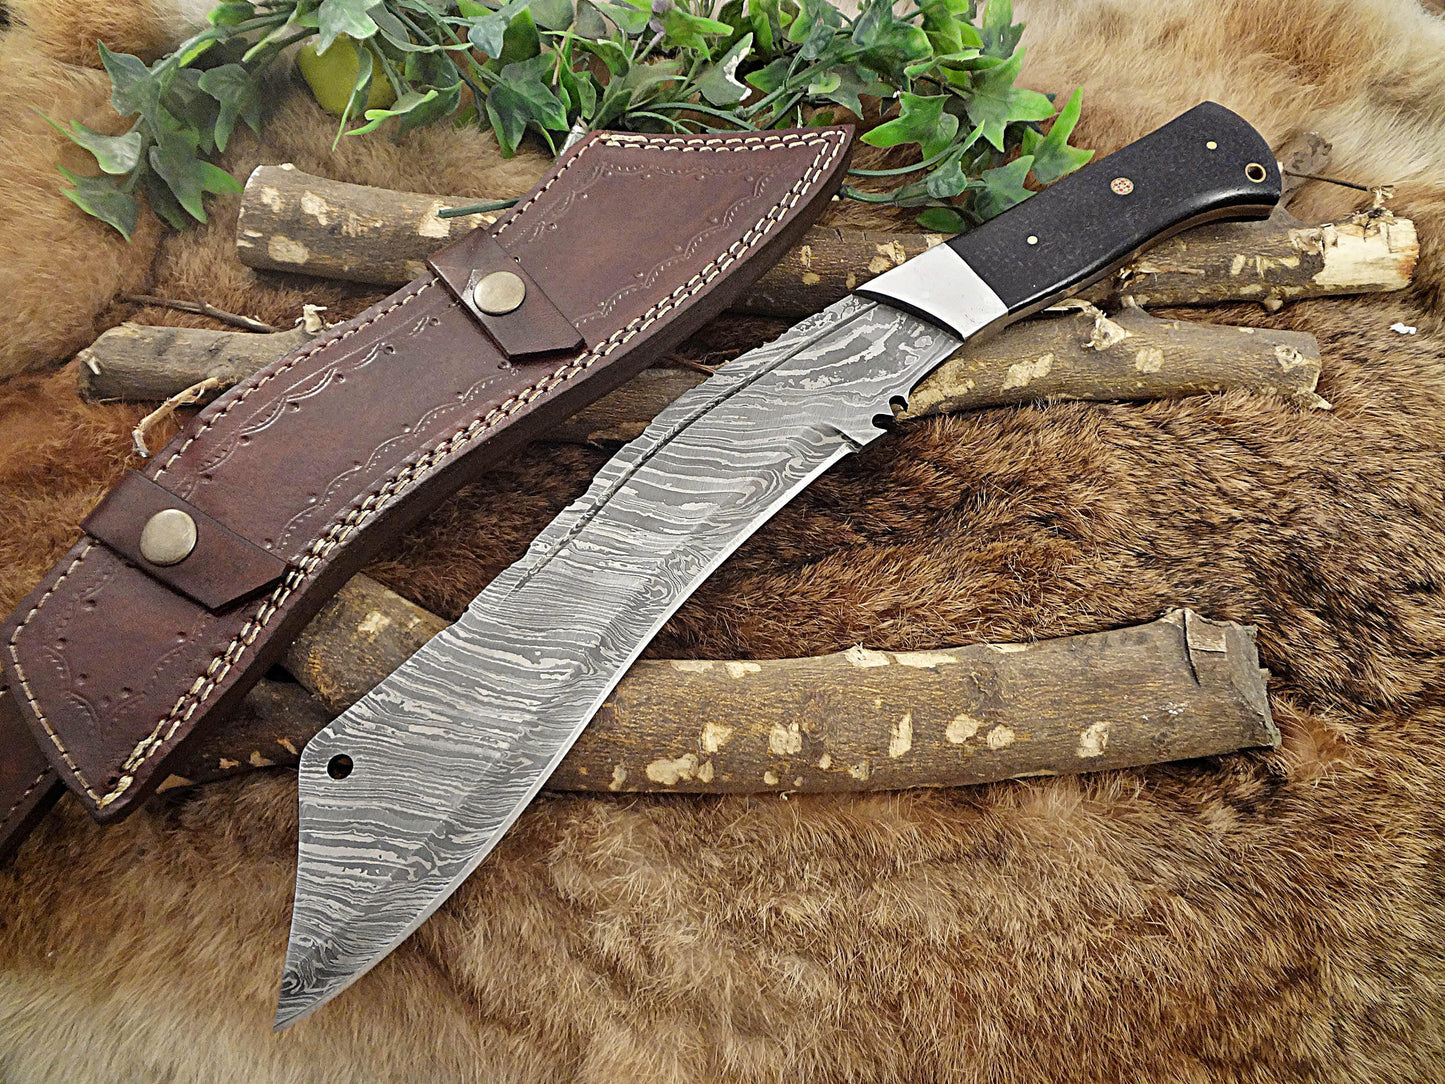 15" Long hand forged Damascus steel Eagle Kukri Knife, 10" full tang blade, Micarta wood scale with steel bolster, Cow hide Leather sheath